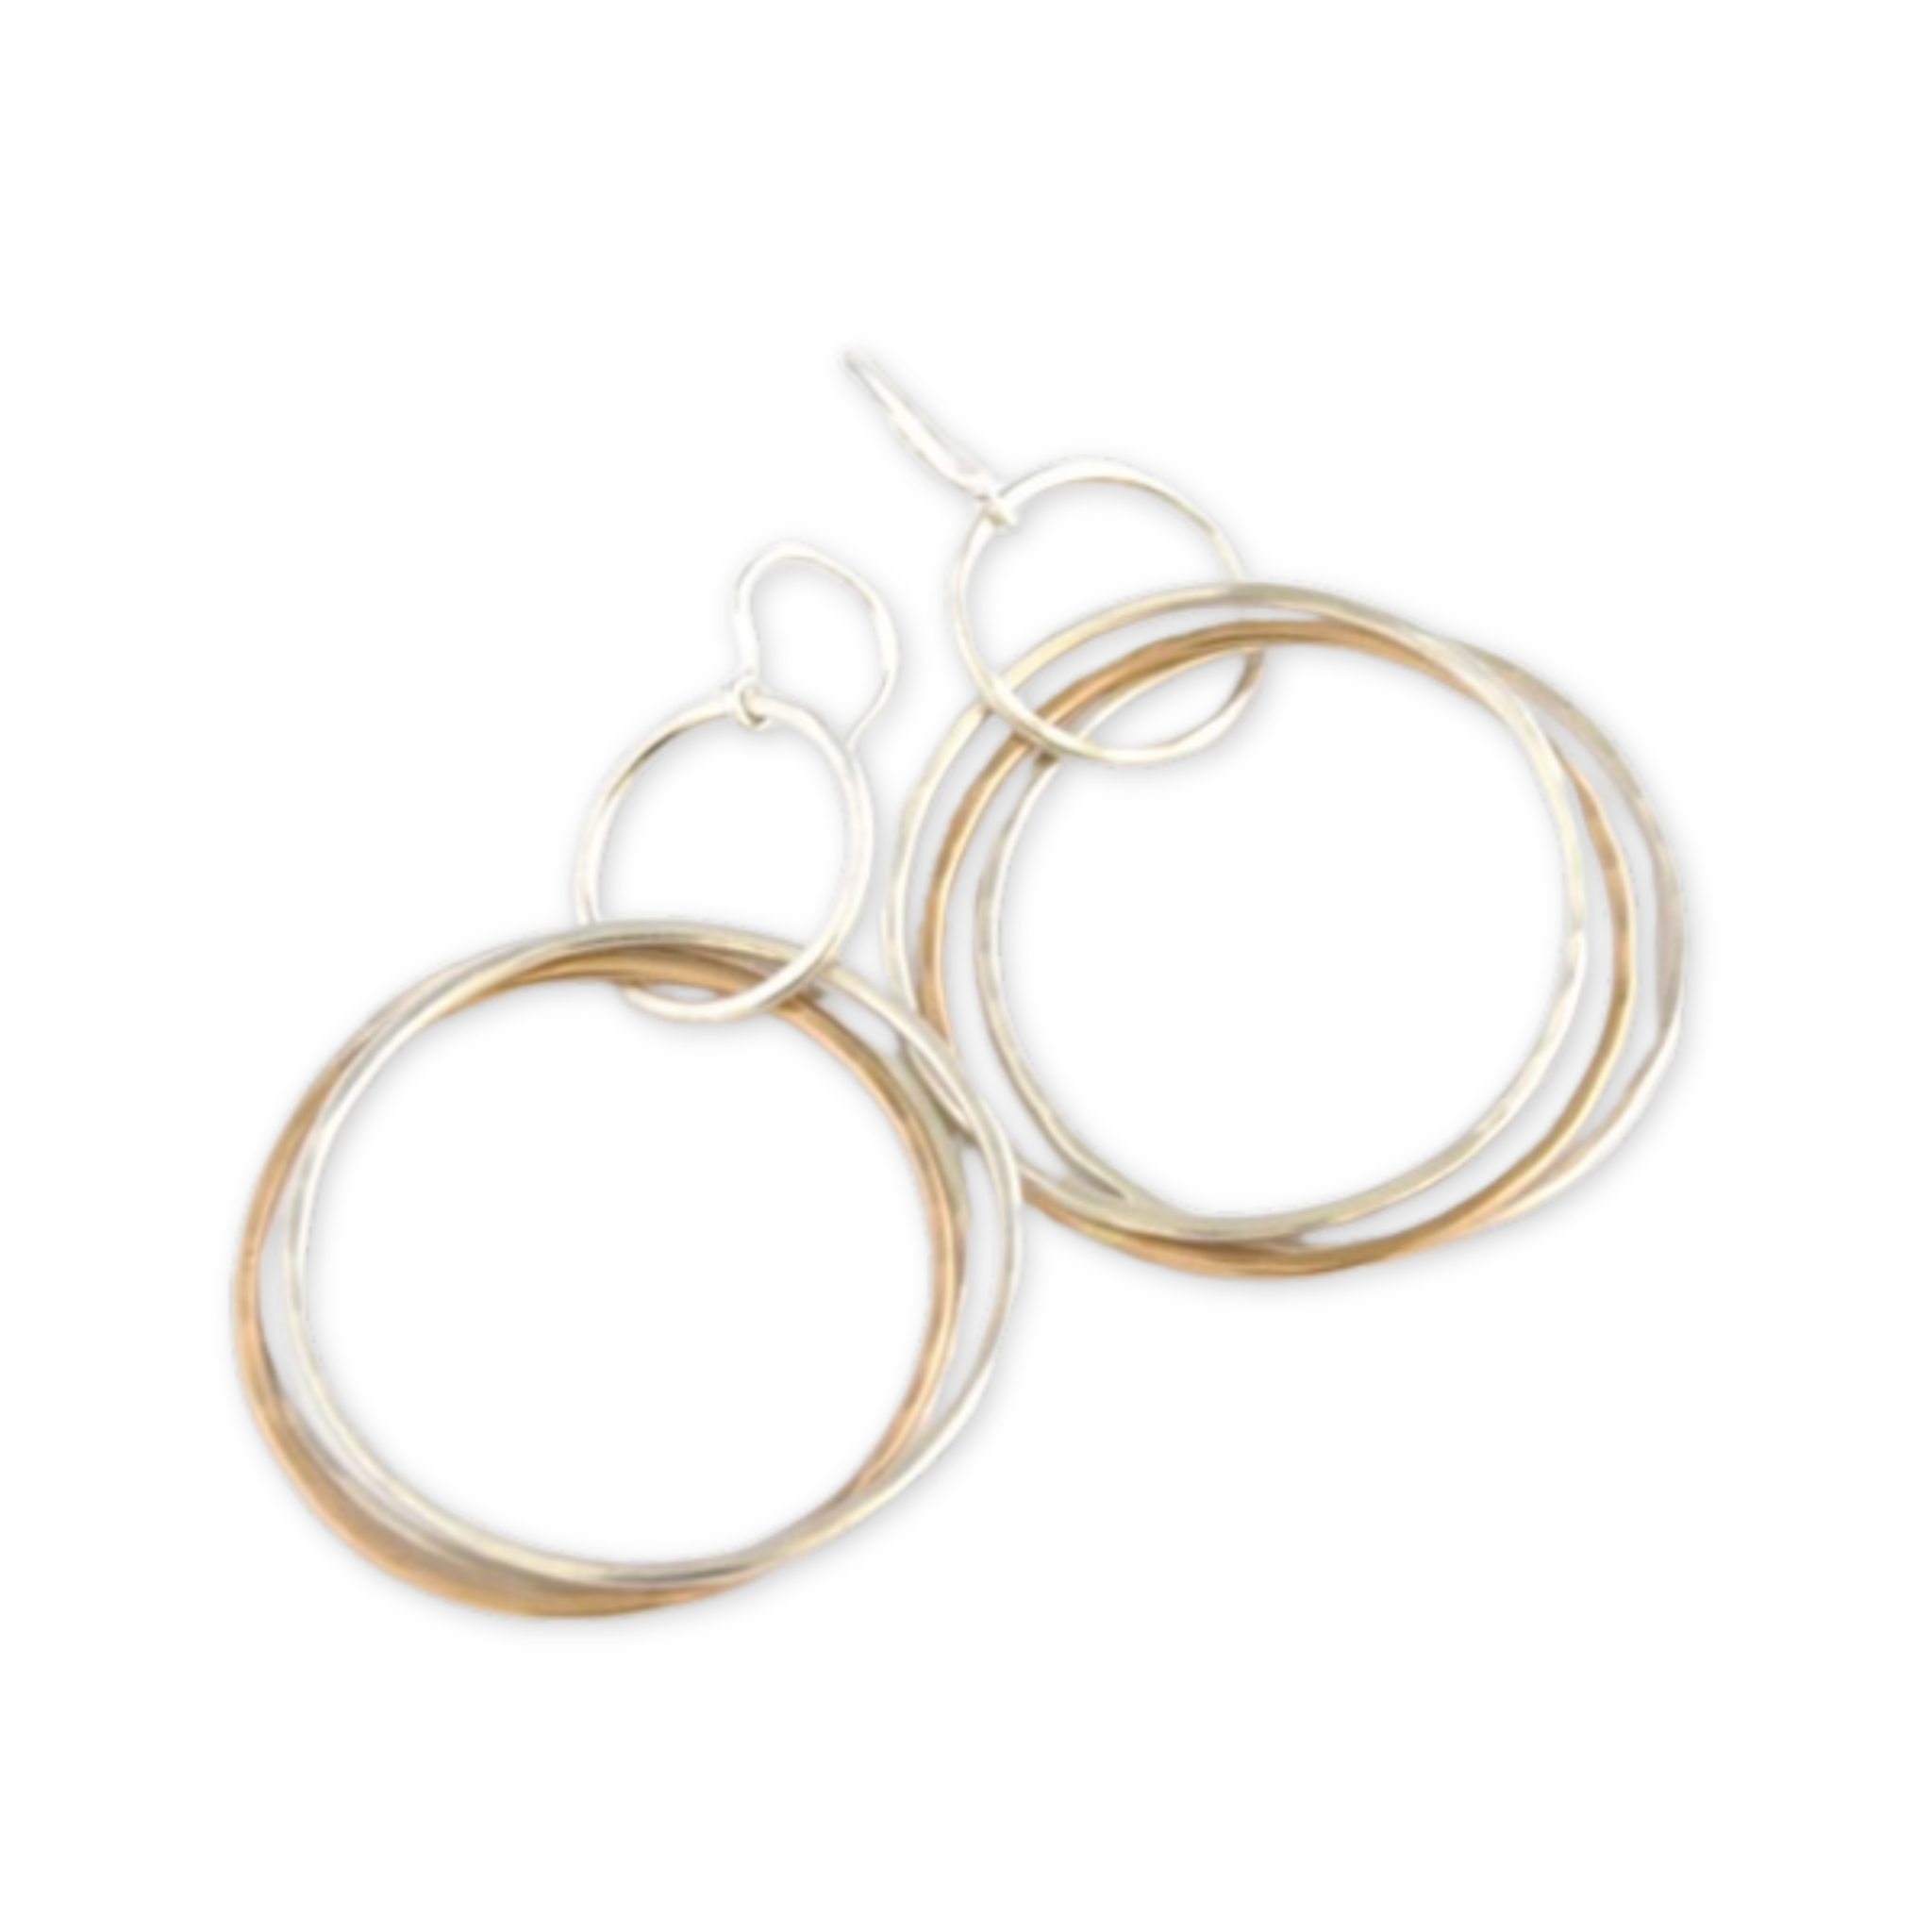 pair of earrings with a group of three hammered hoops hanging on a smaller hoop